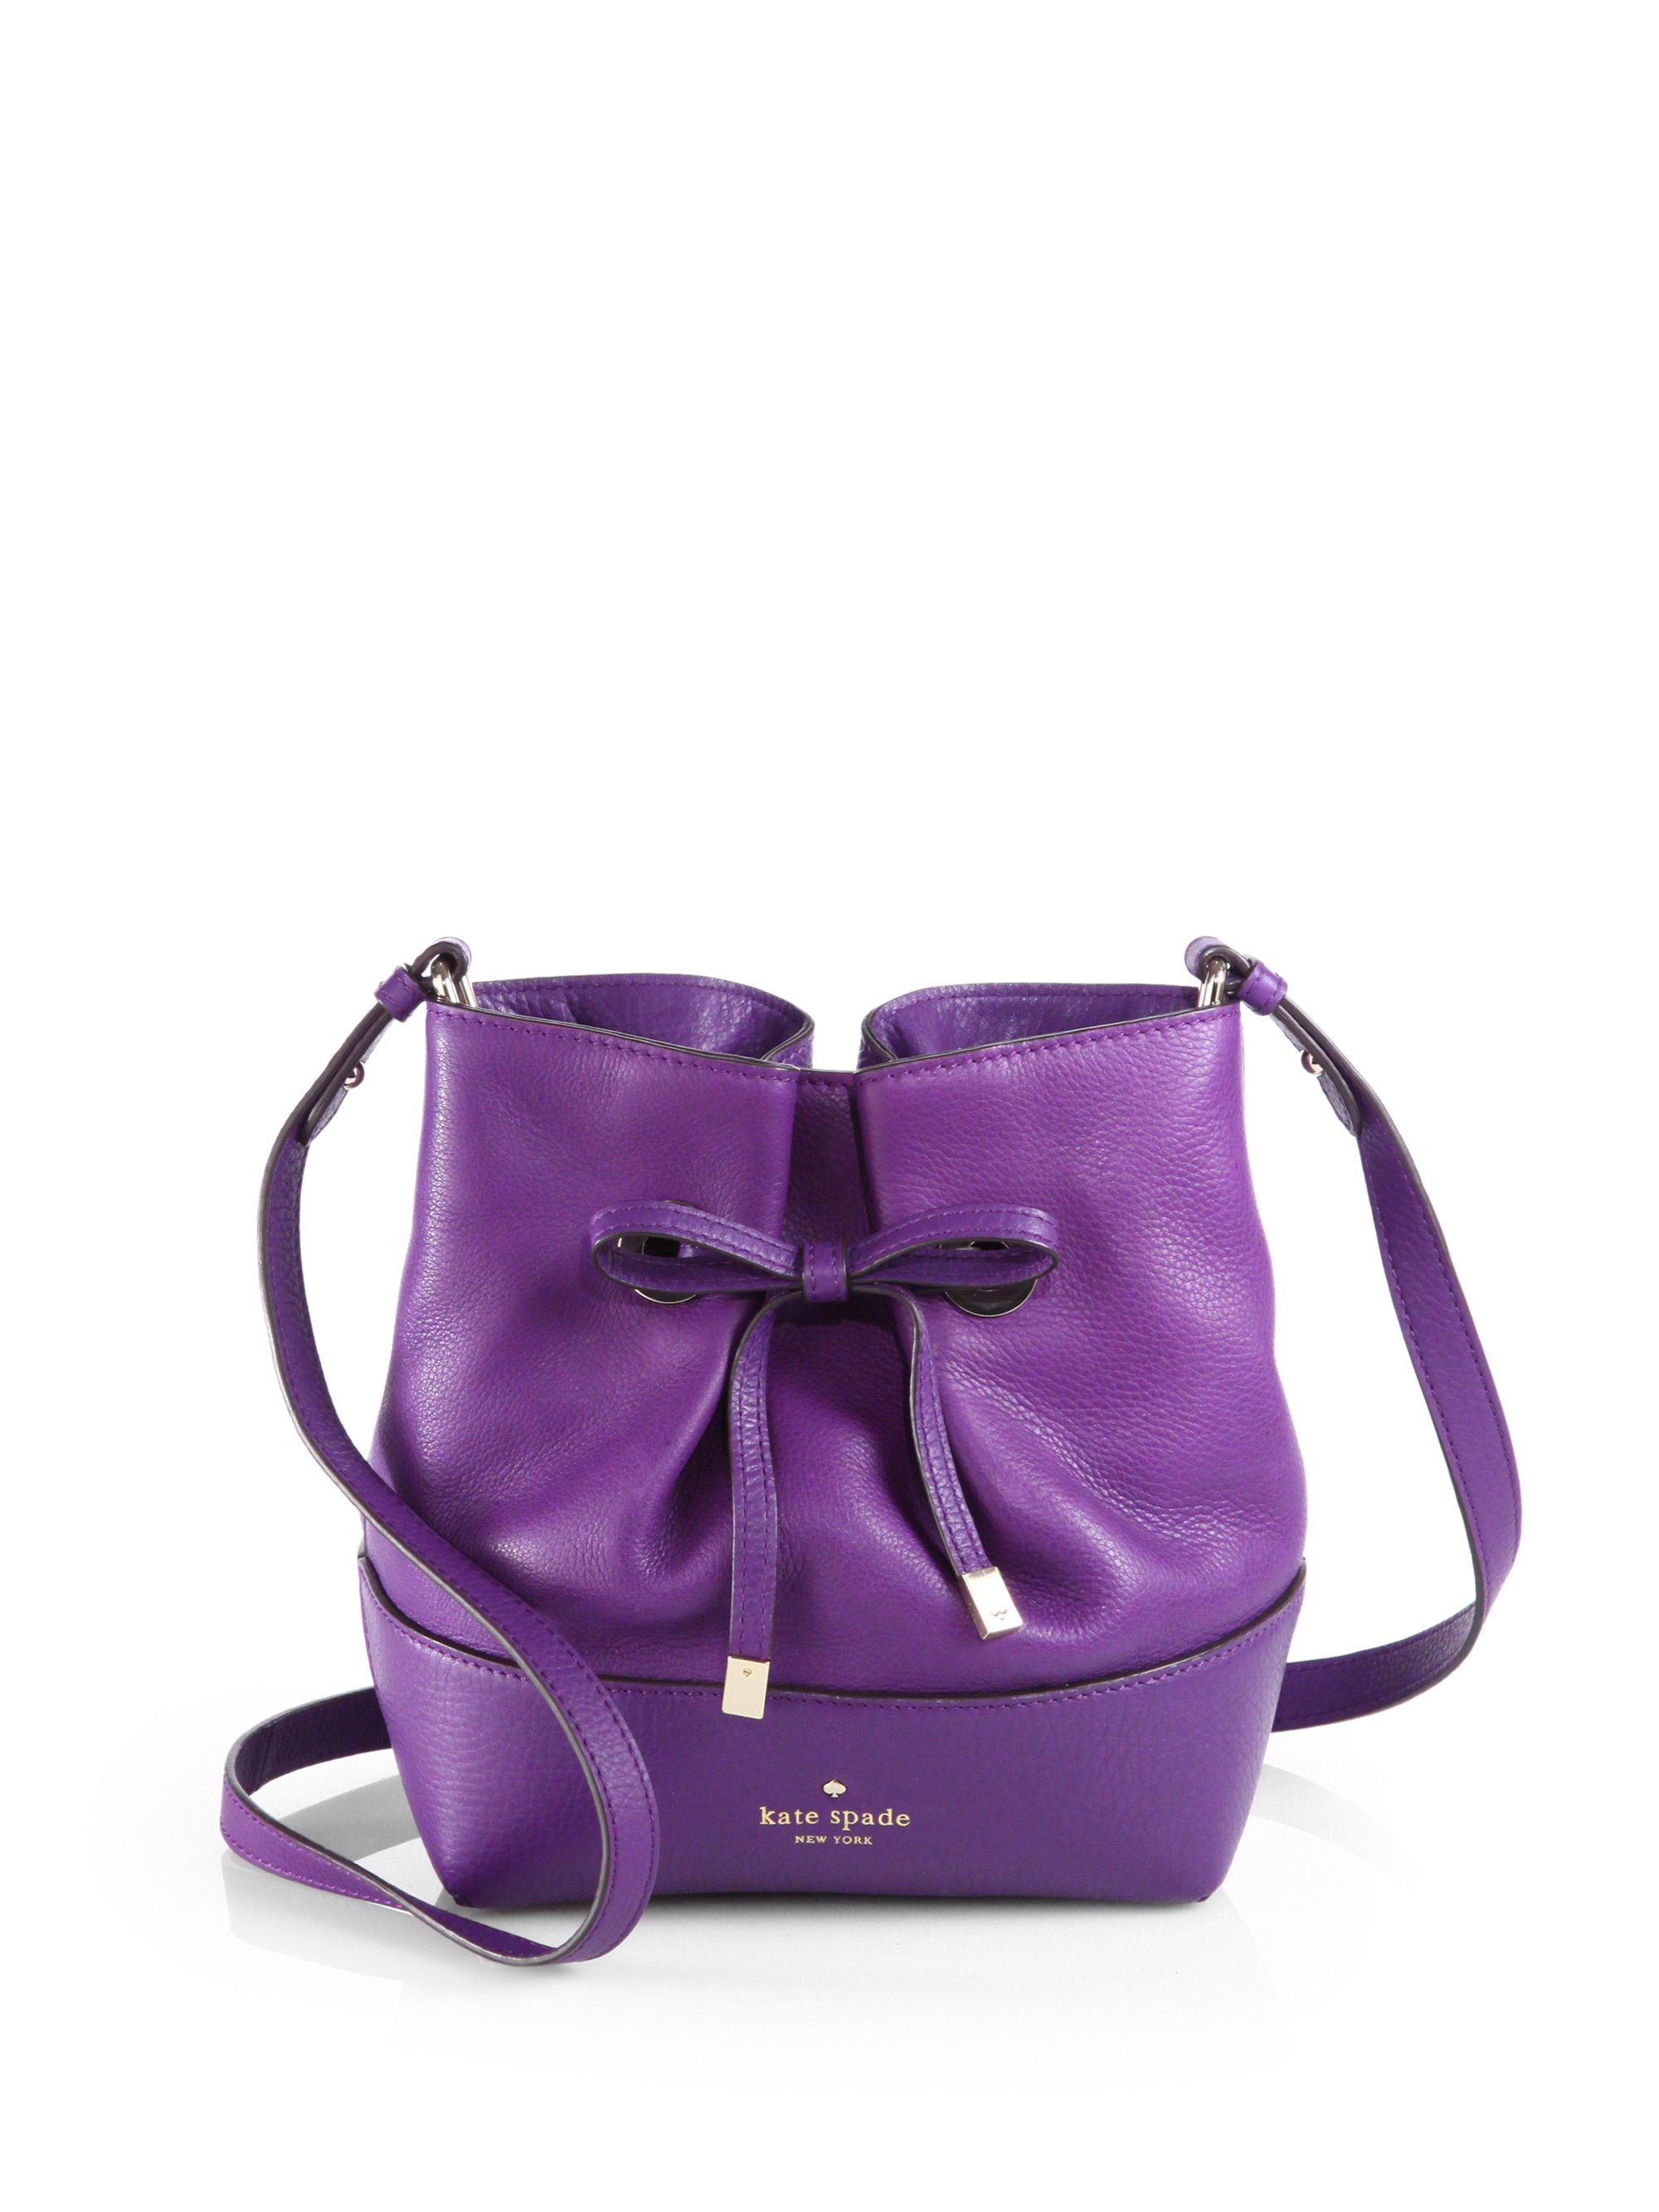 Lyst - Kate spade new york West Valley Bow Crossbody Bag in Purple